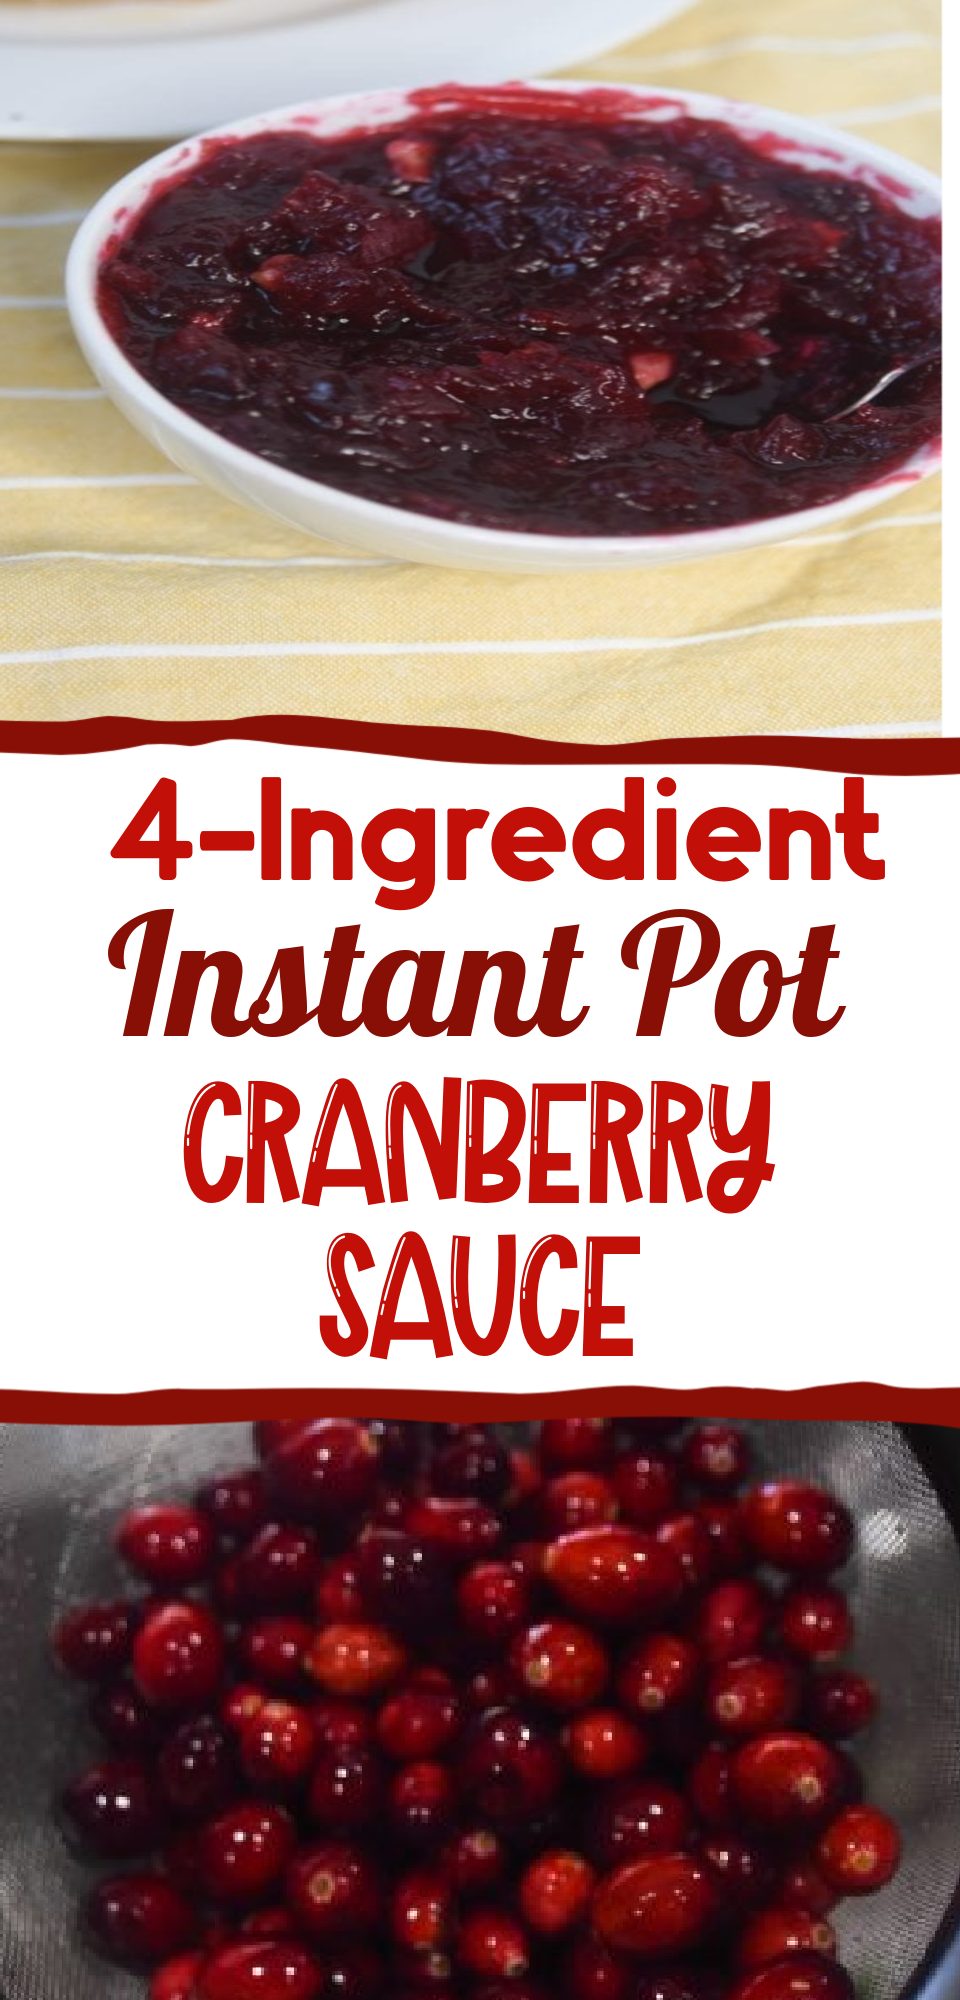 This classic Thanksgiving side dish is simple and delicious. This Instant Pot Cranberry Sauce recipe adds sweetness to your favorite Thanksgiving food.